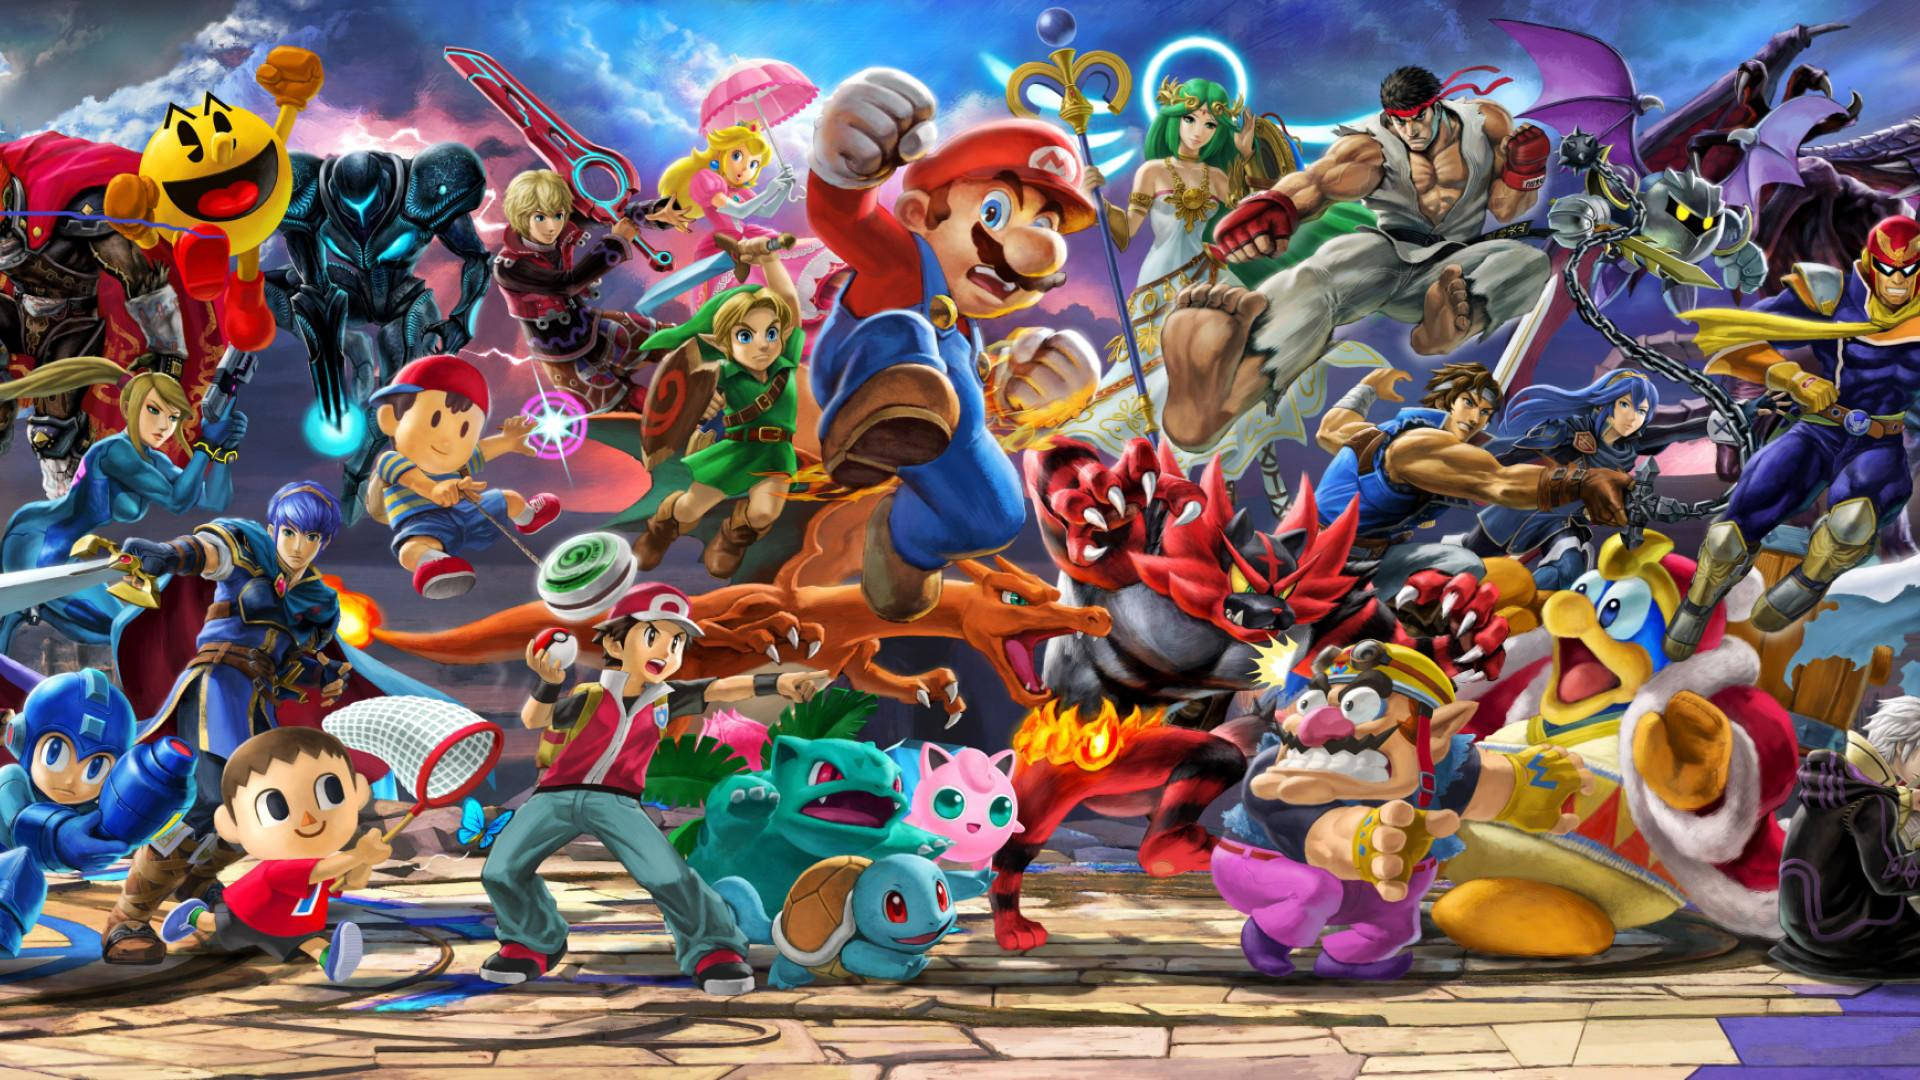 A group of characters from Super Smash Bros Ultimate ar ready to brawl. Wallpaper